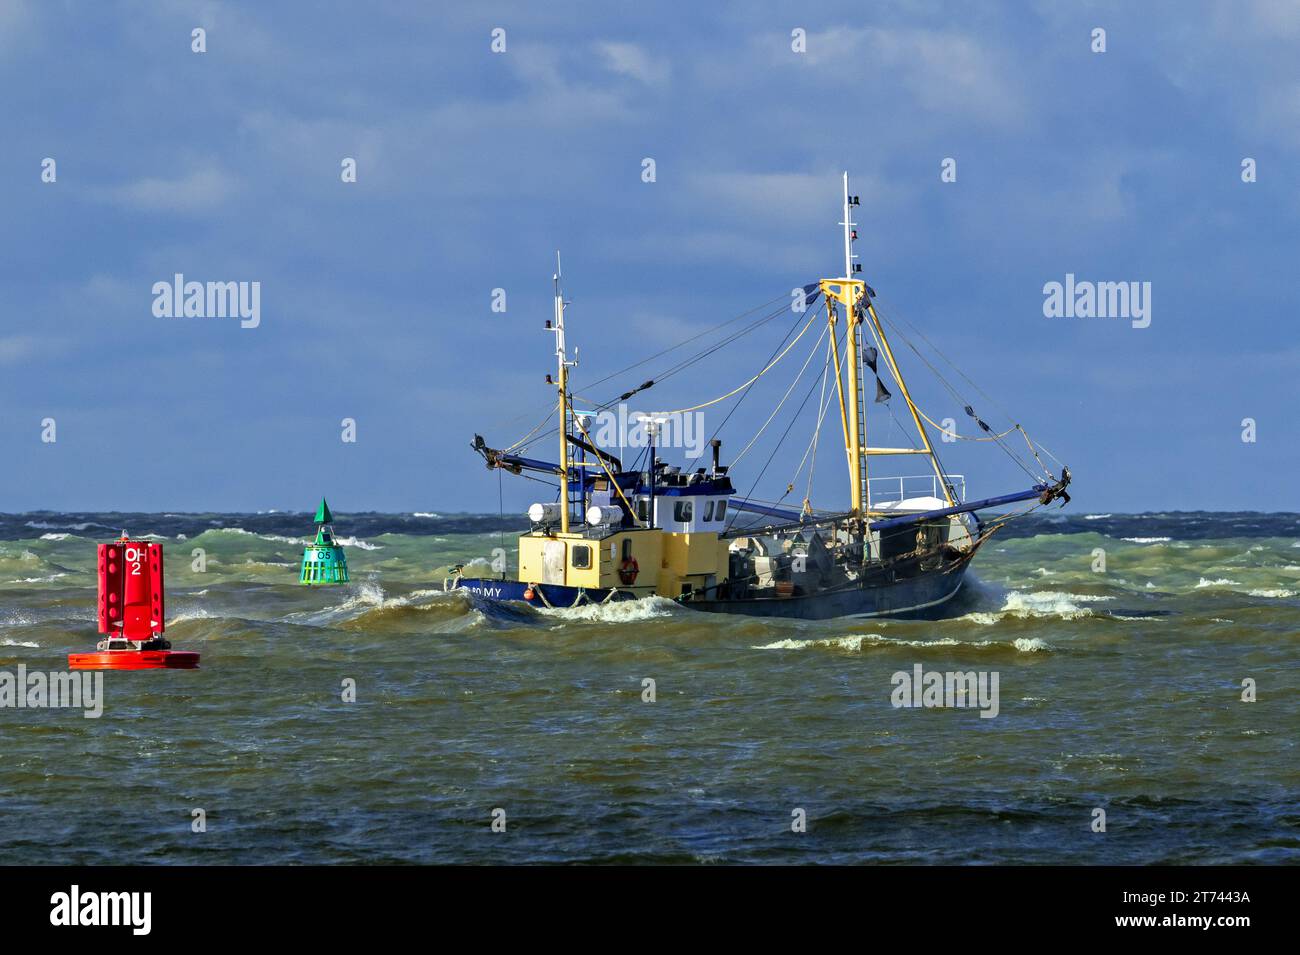 Shrimp cutter 0.191 Romy leaving the Ostend port to go bottom trawling for shrimps along the North Sea coast on a stormy day, Belgium Stock Photo